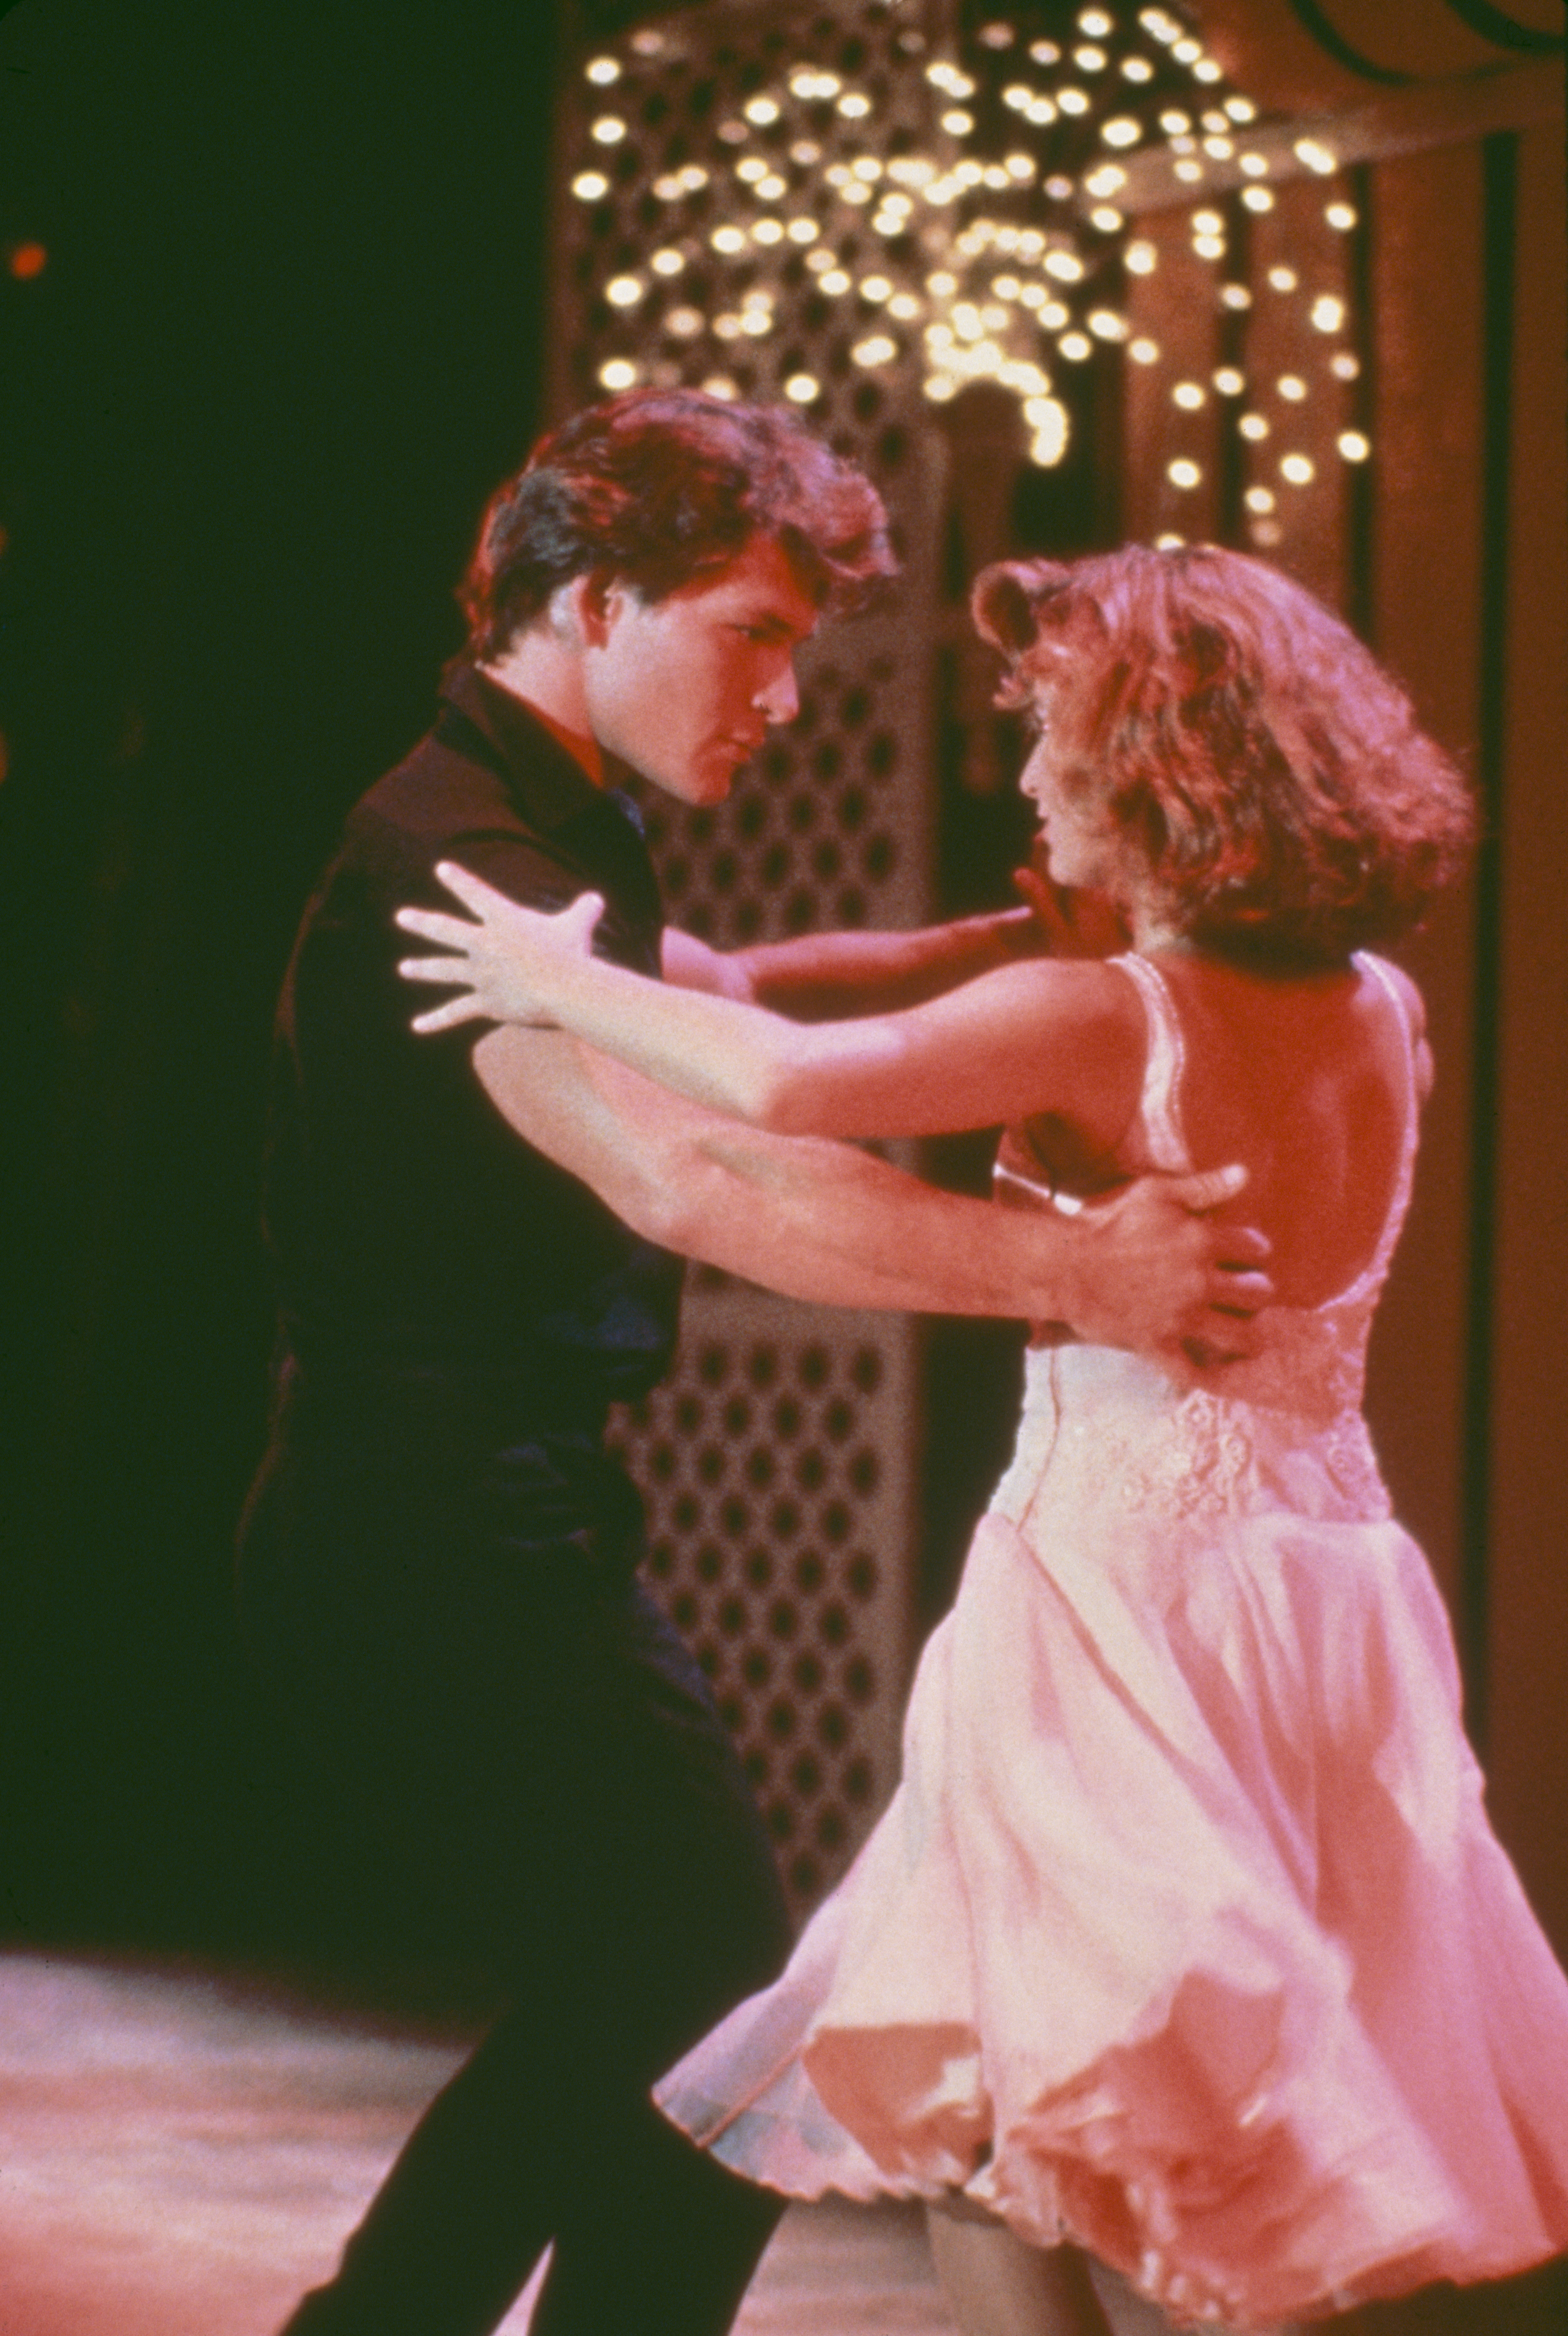 Patrick Swayze and Jennifer Grey on the set of "Dirty Dancing," 1987. | Source: Getty Images